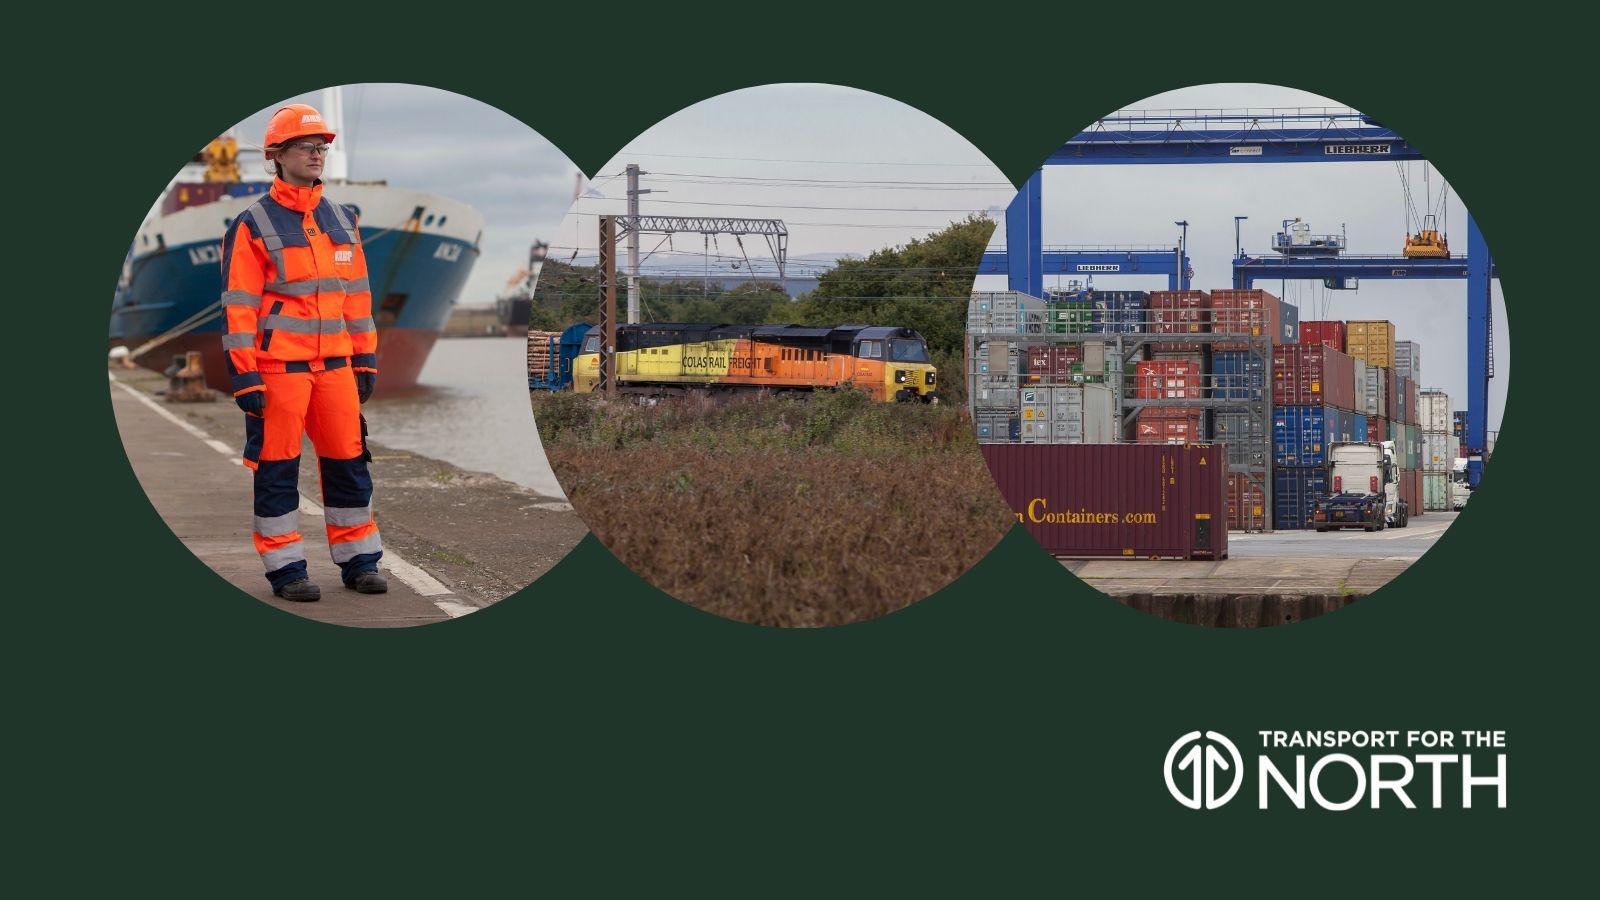 Woman at docks, freight train and shipping containers